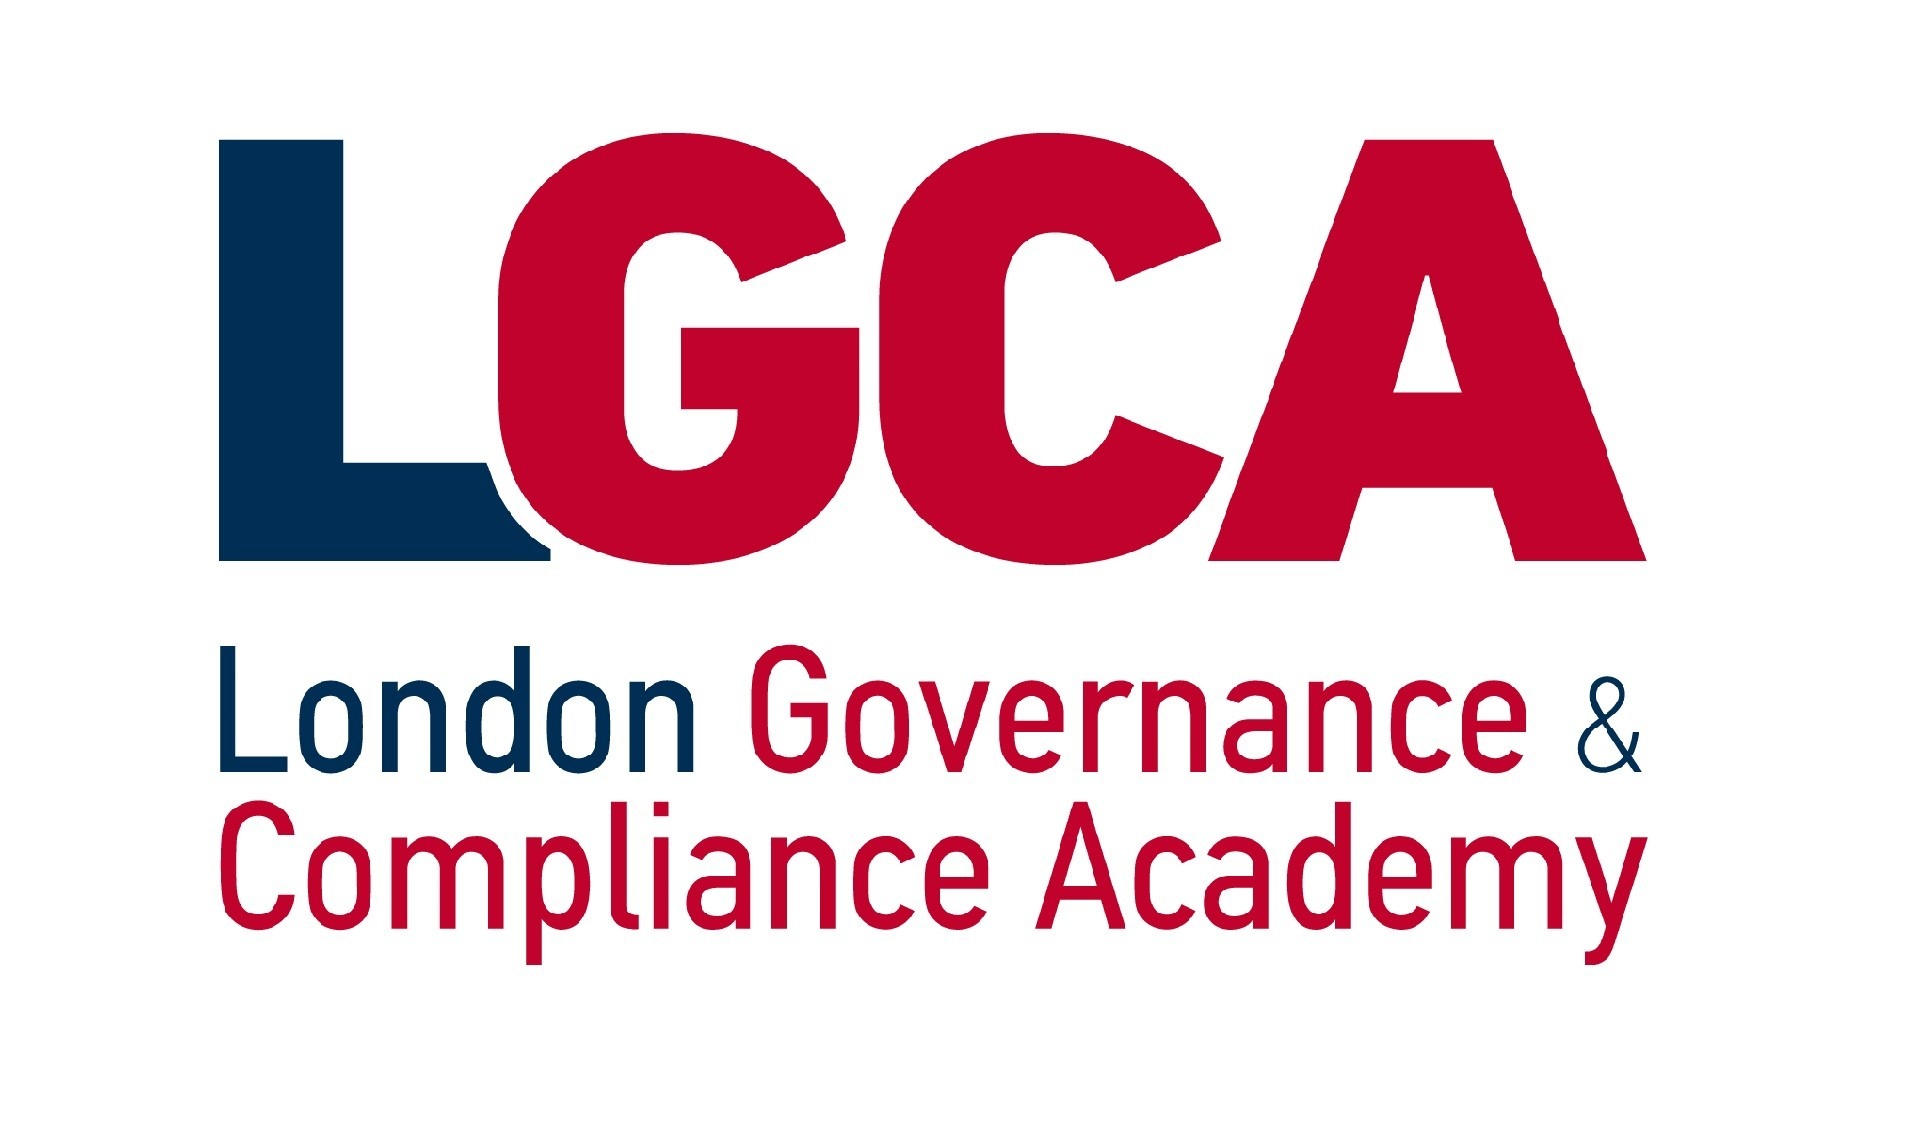 More about London Governance & Compliance Academy (LGCA)